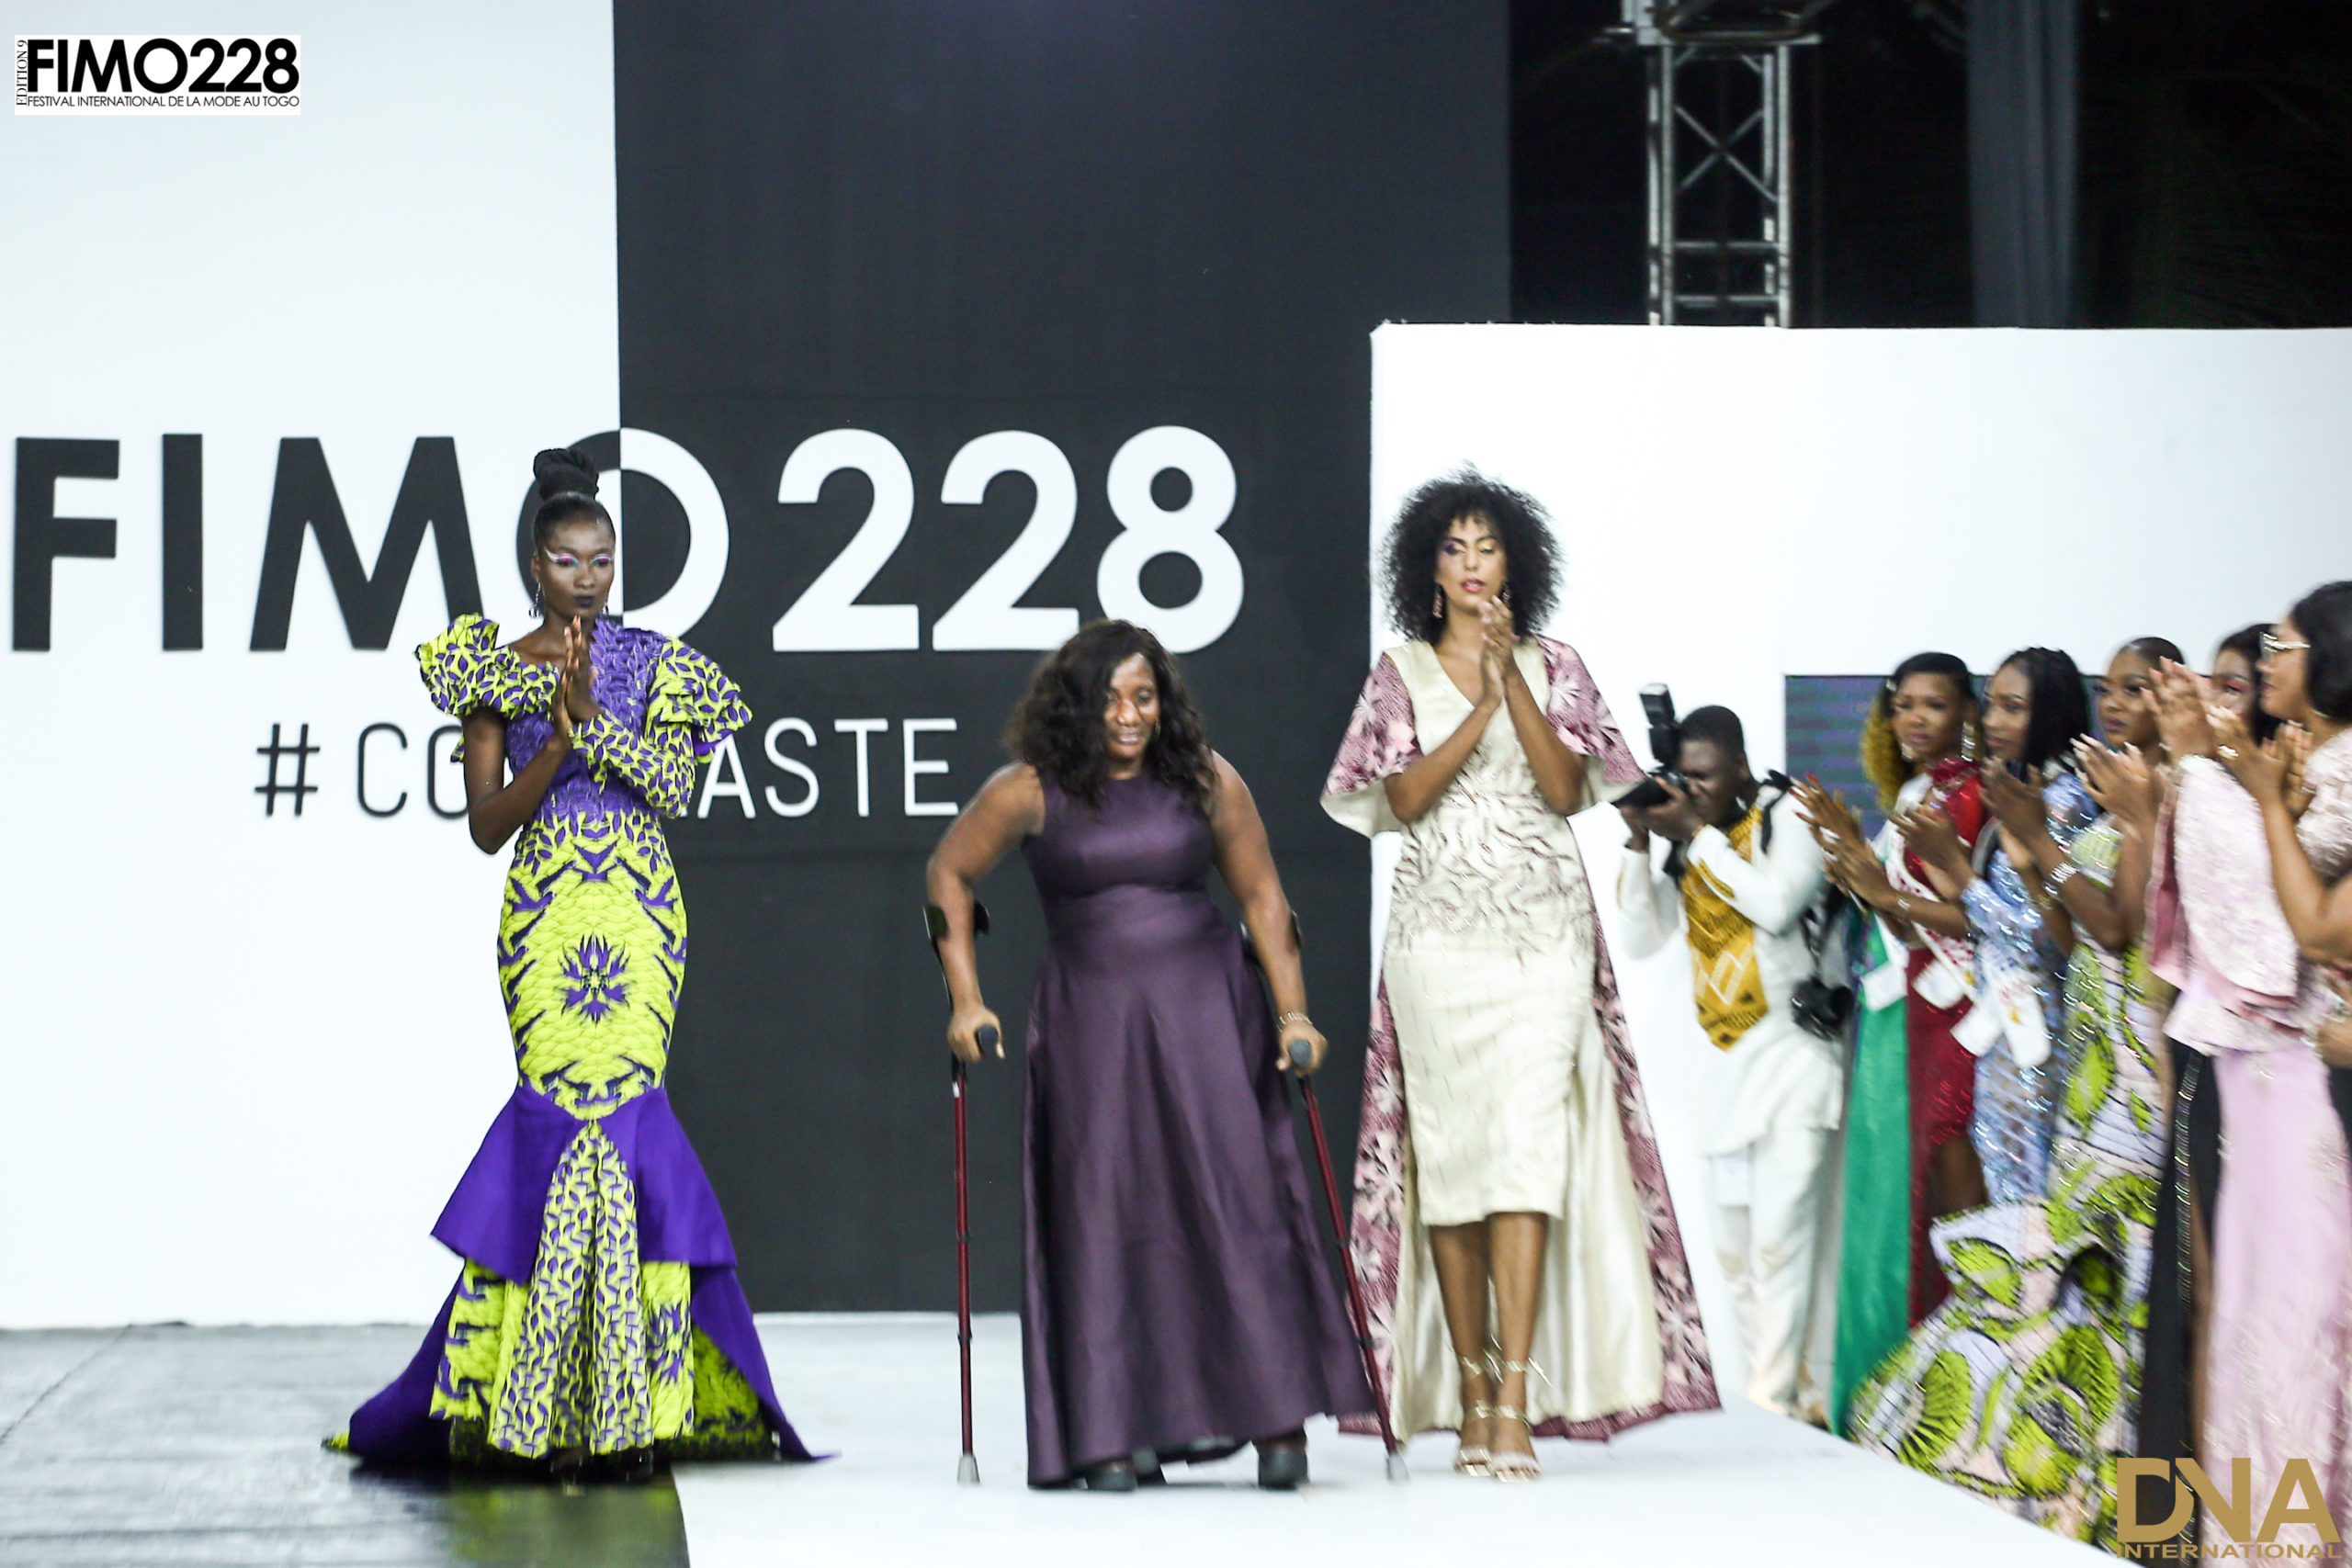 Crédaniah-Fashion-House-Collection -Couture-MIAWEZON-FIMO228-Edition-9-from-Lome-TOGO-2022-DN-A-INTERNATIONAL-Media-Partner-MD0A3605